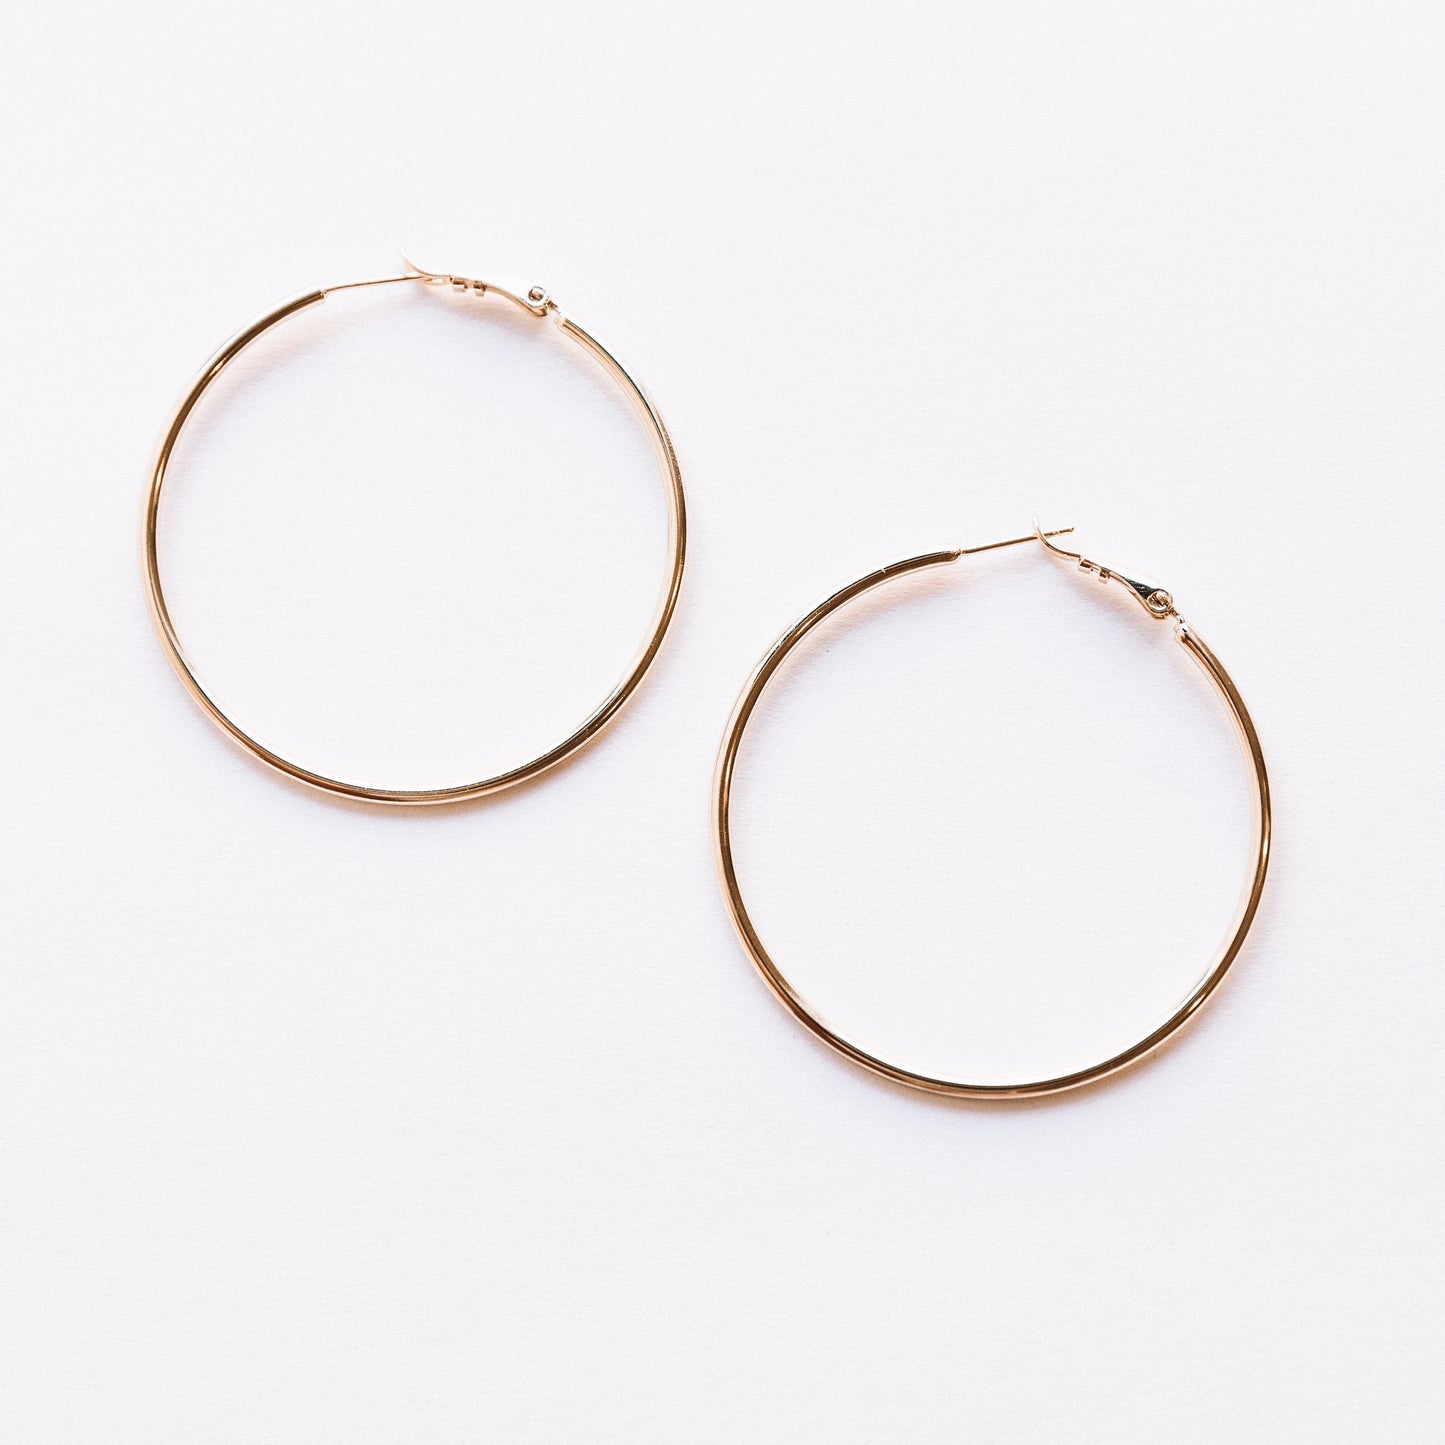 The Gold Hoops